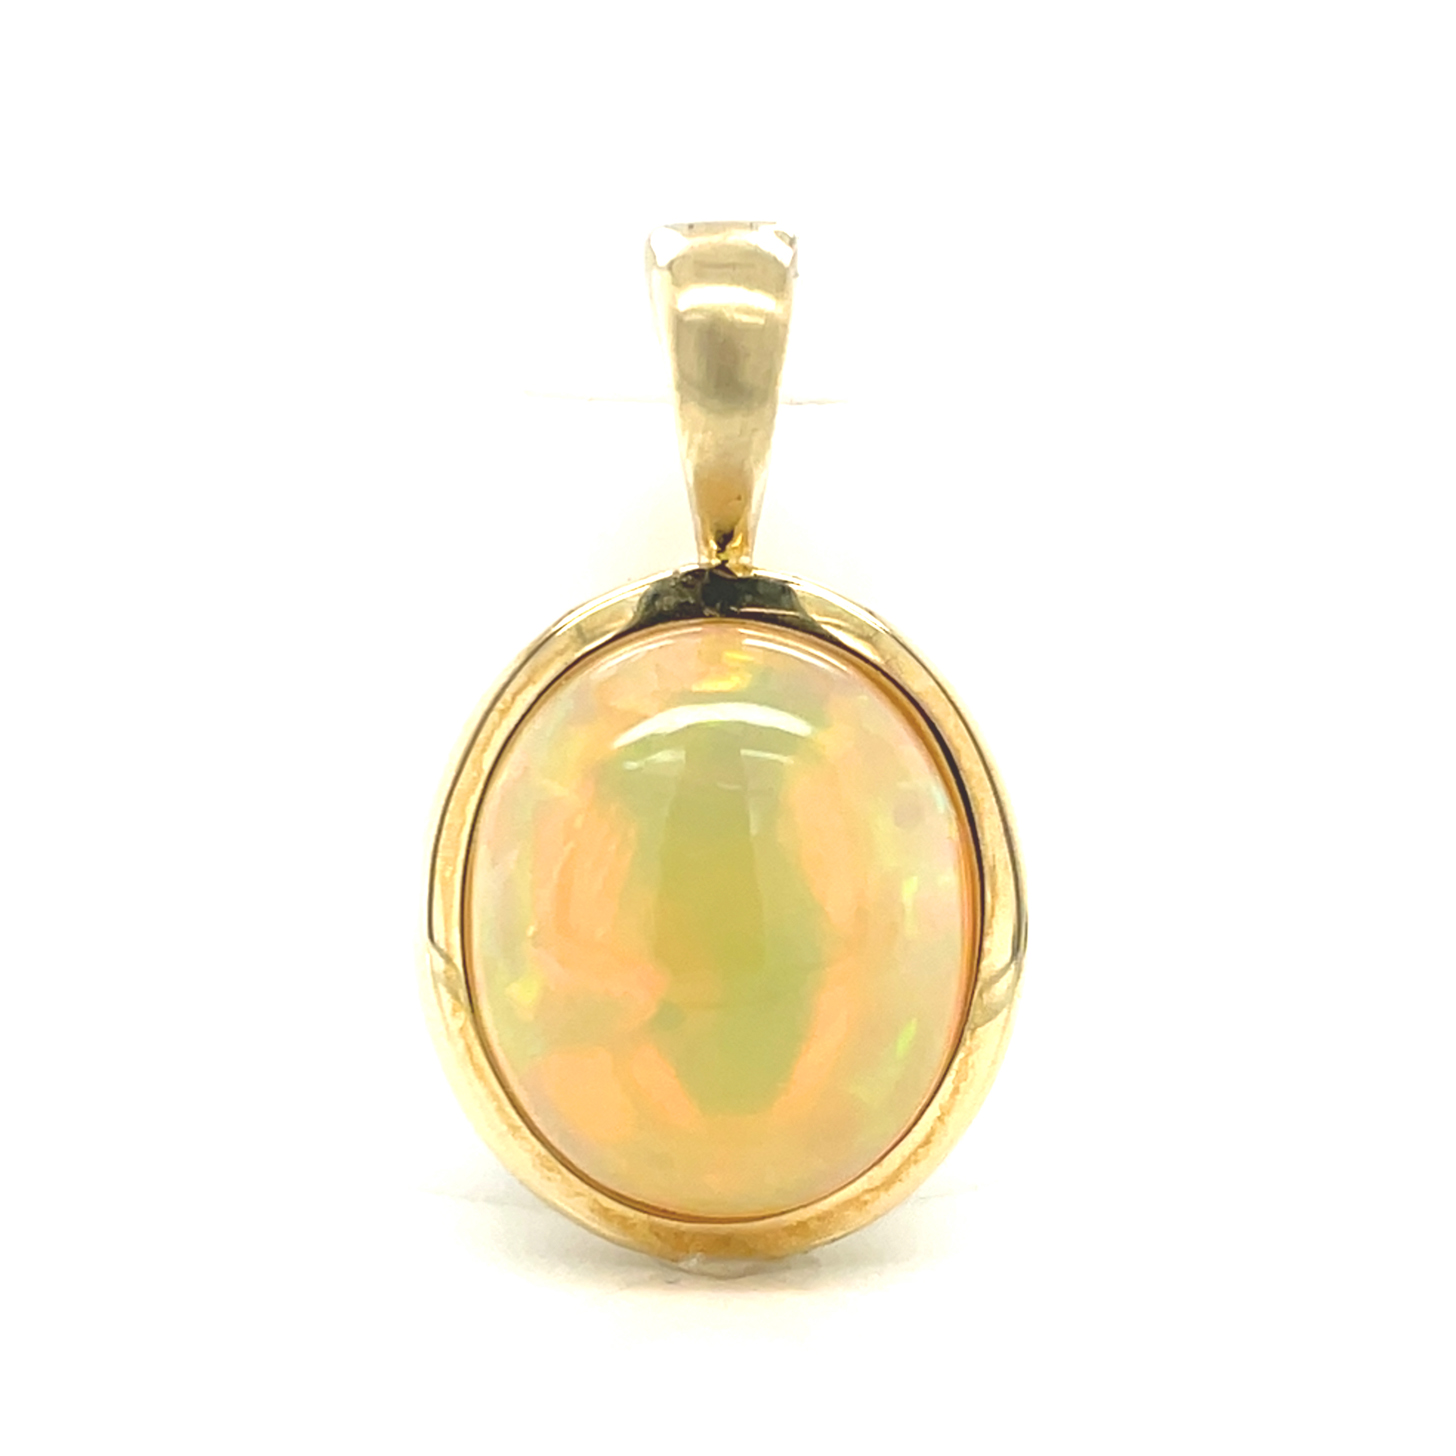 Kristallopal, gold-opalisierend, oval Cabochon, ca. 4,0 ct. Edelstein Clip-Anhänger Gelbgold 375/000 Sogni d´oro Terra Opalis